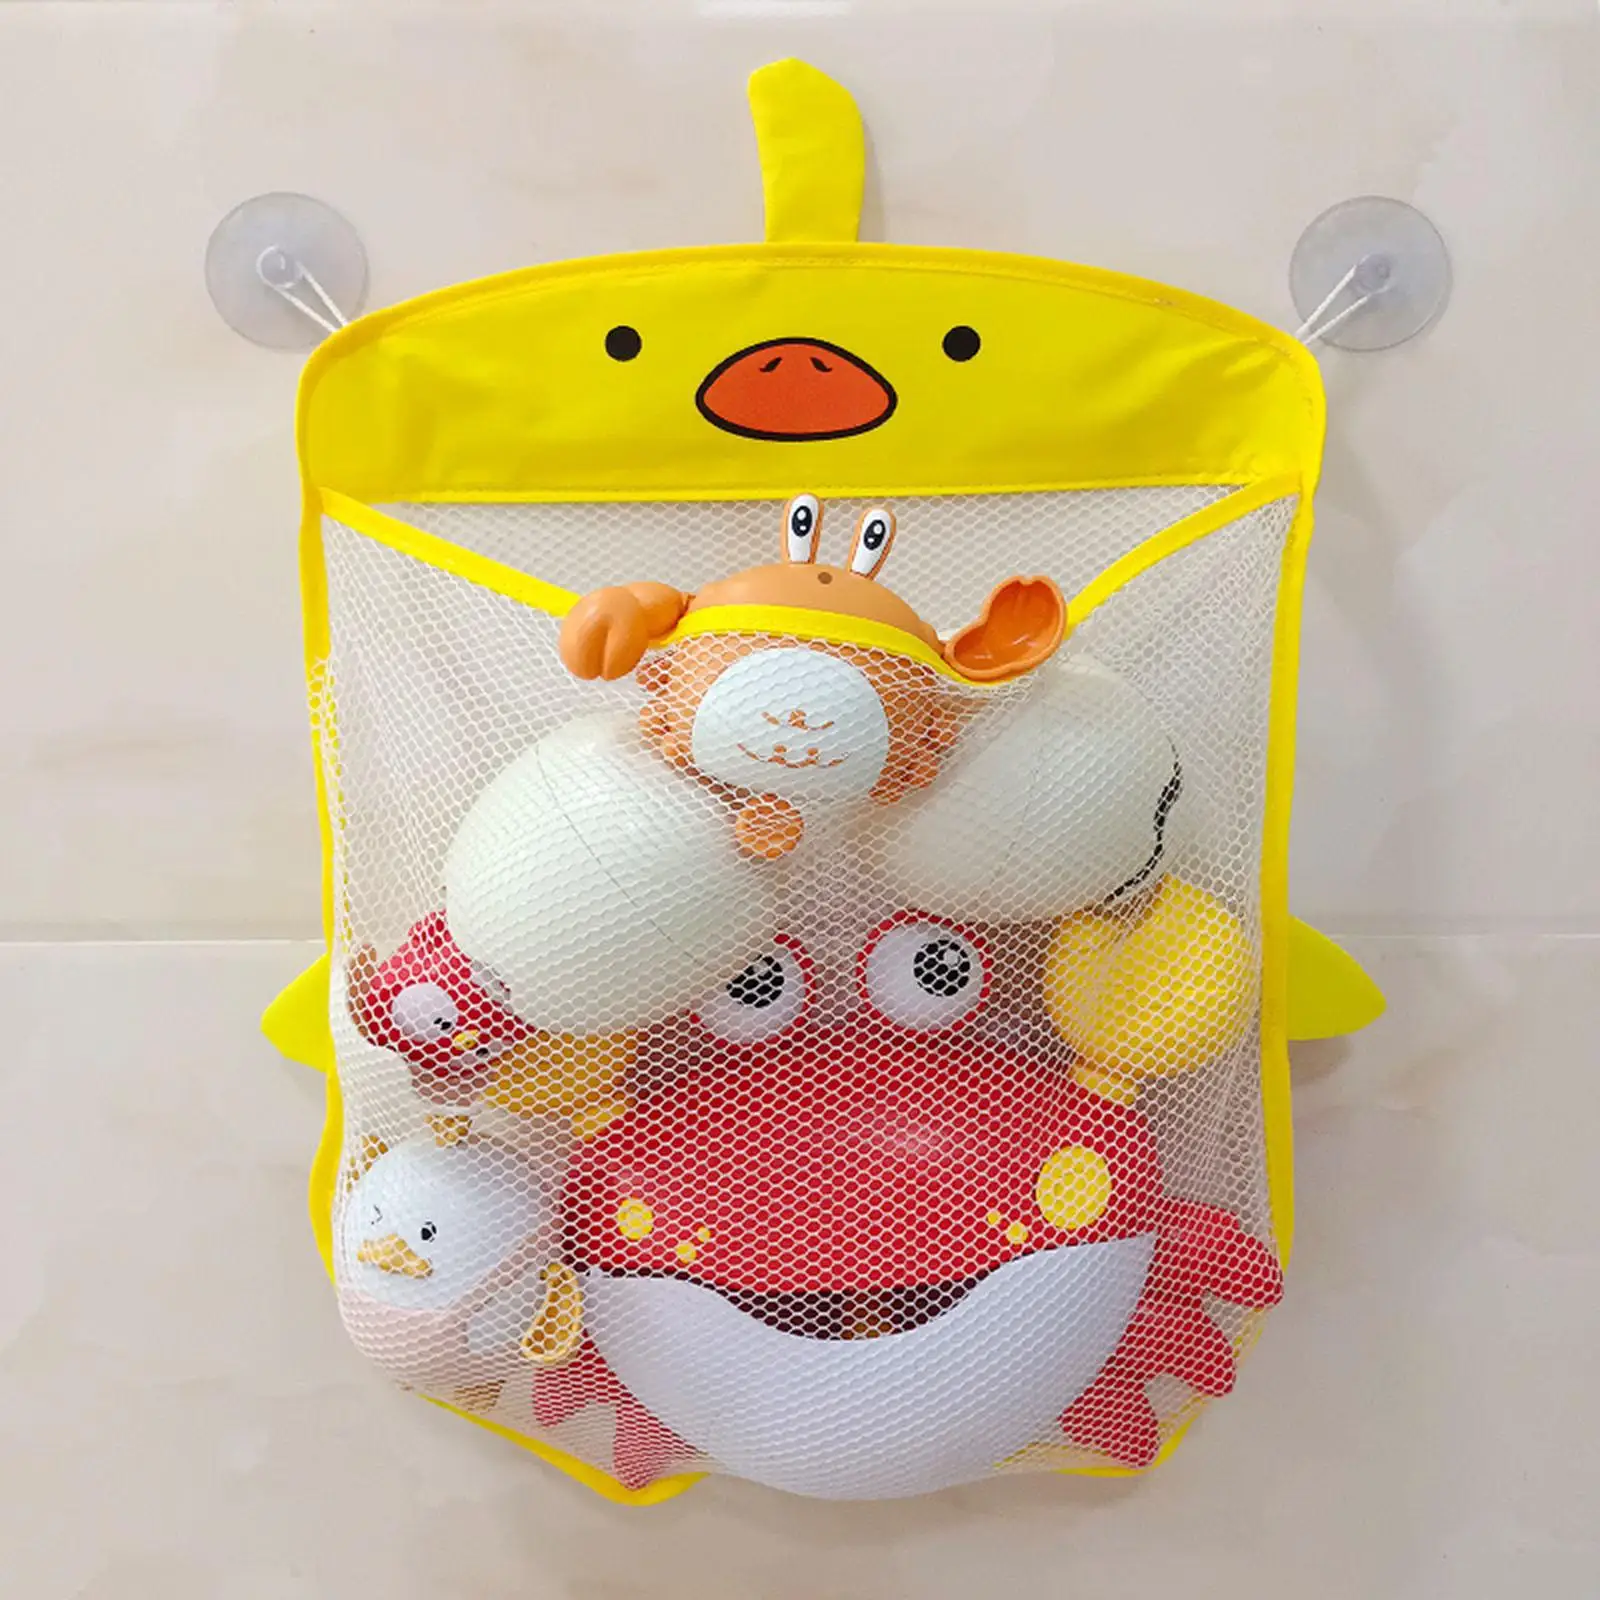 Hanging Toy Storage Mesh Bag Quick Drying Duck Shape Organizer with Suction Cups Holder Toy Organizer Mesh Bag for Baby Children